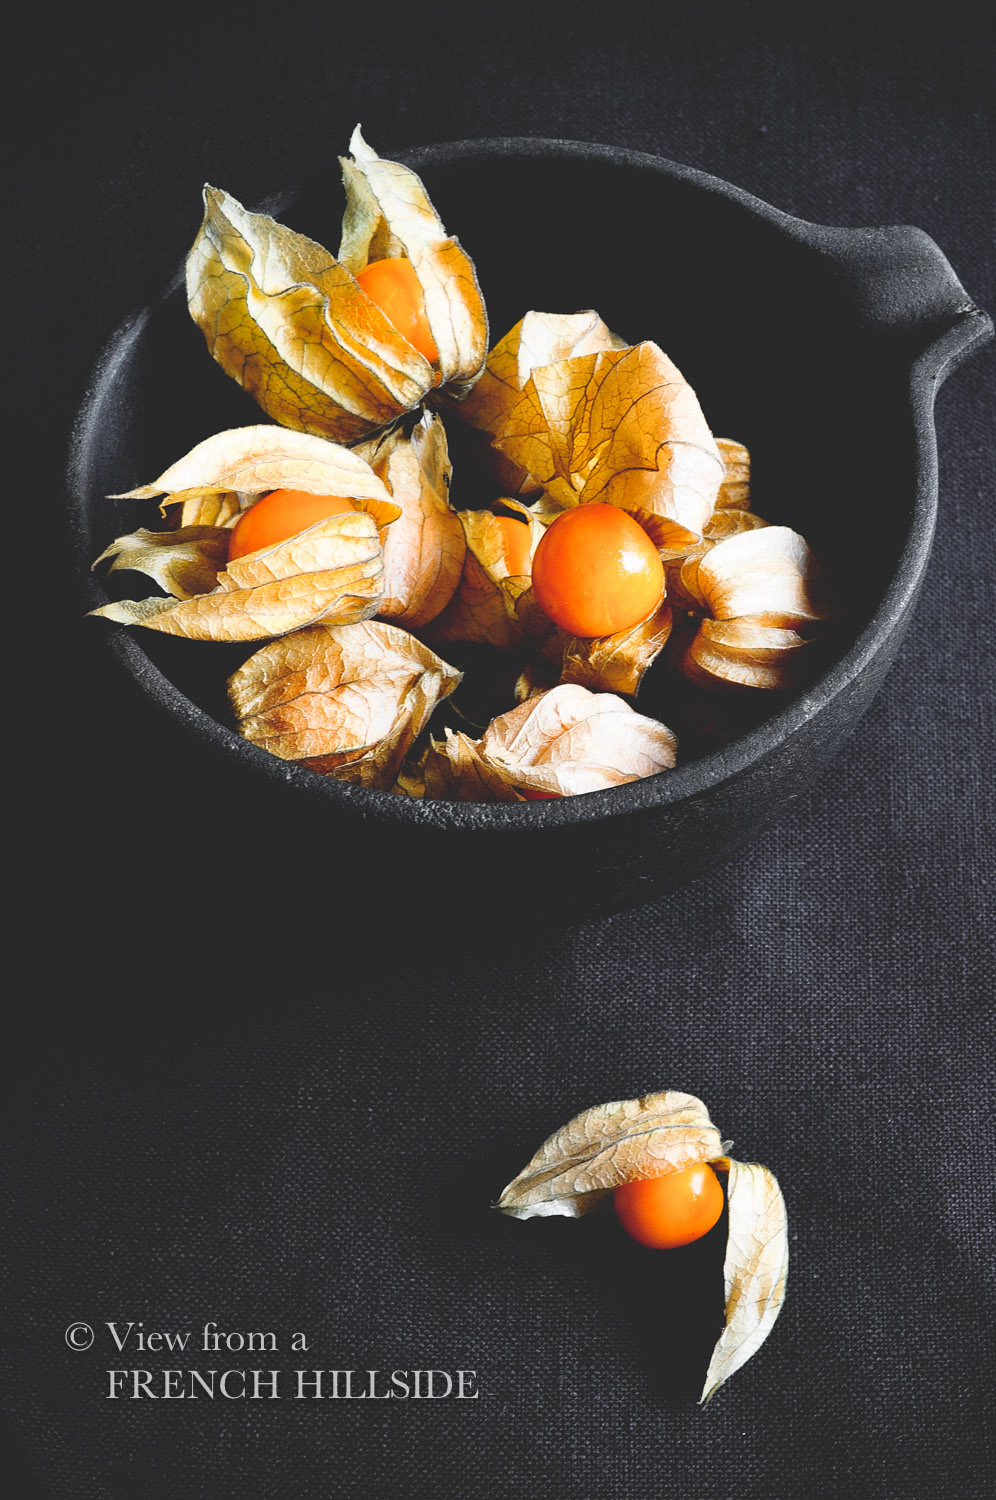 Physalis is the exotic fruit that stands out - Nature's Pride